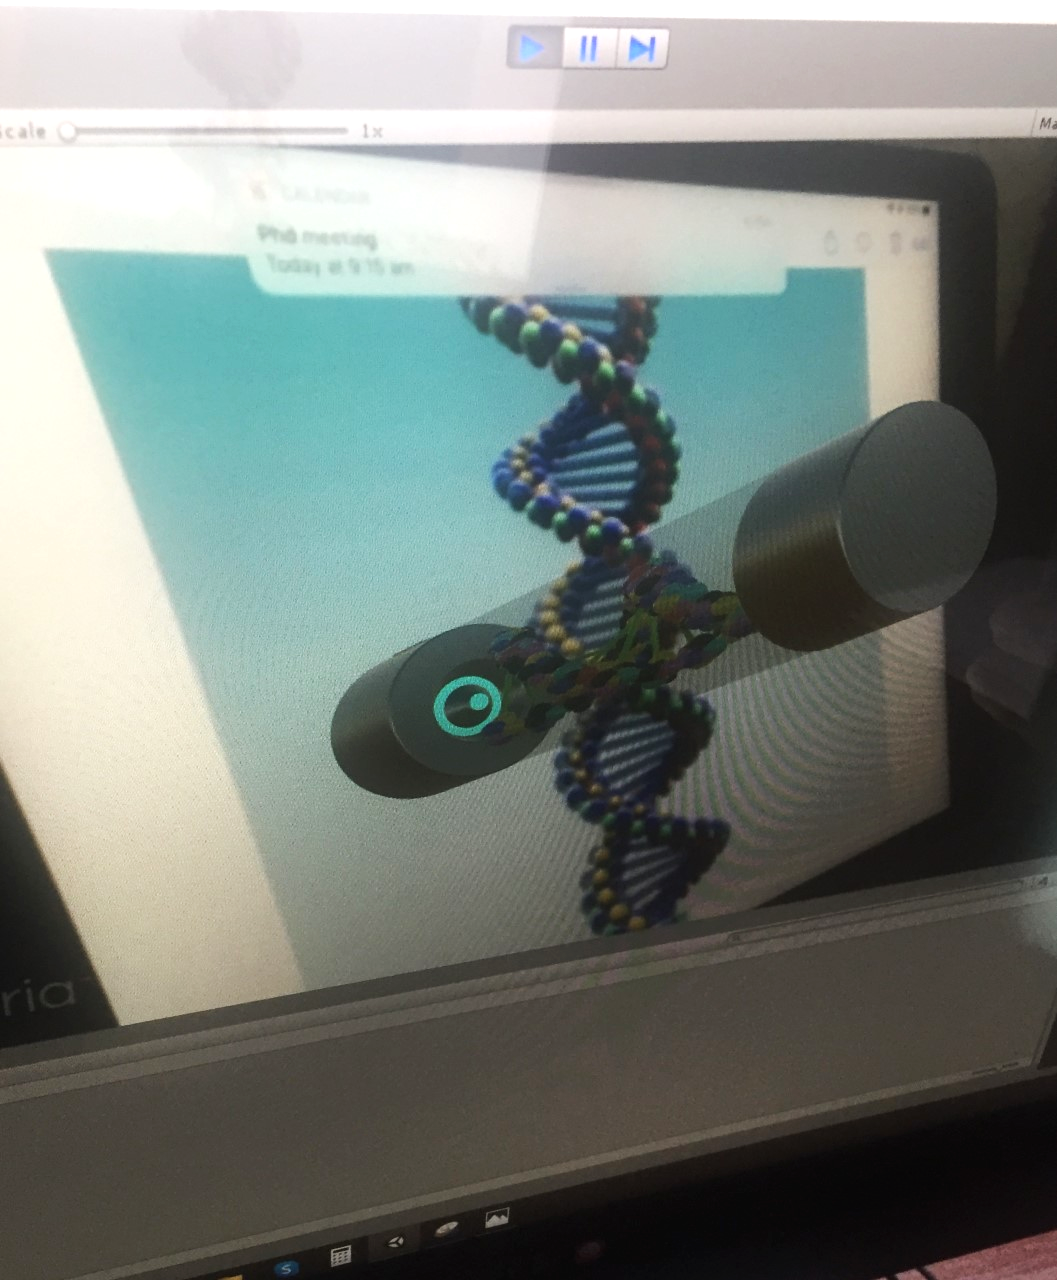 Photograph of a 3D model that is appearing on the computer.